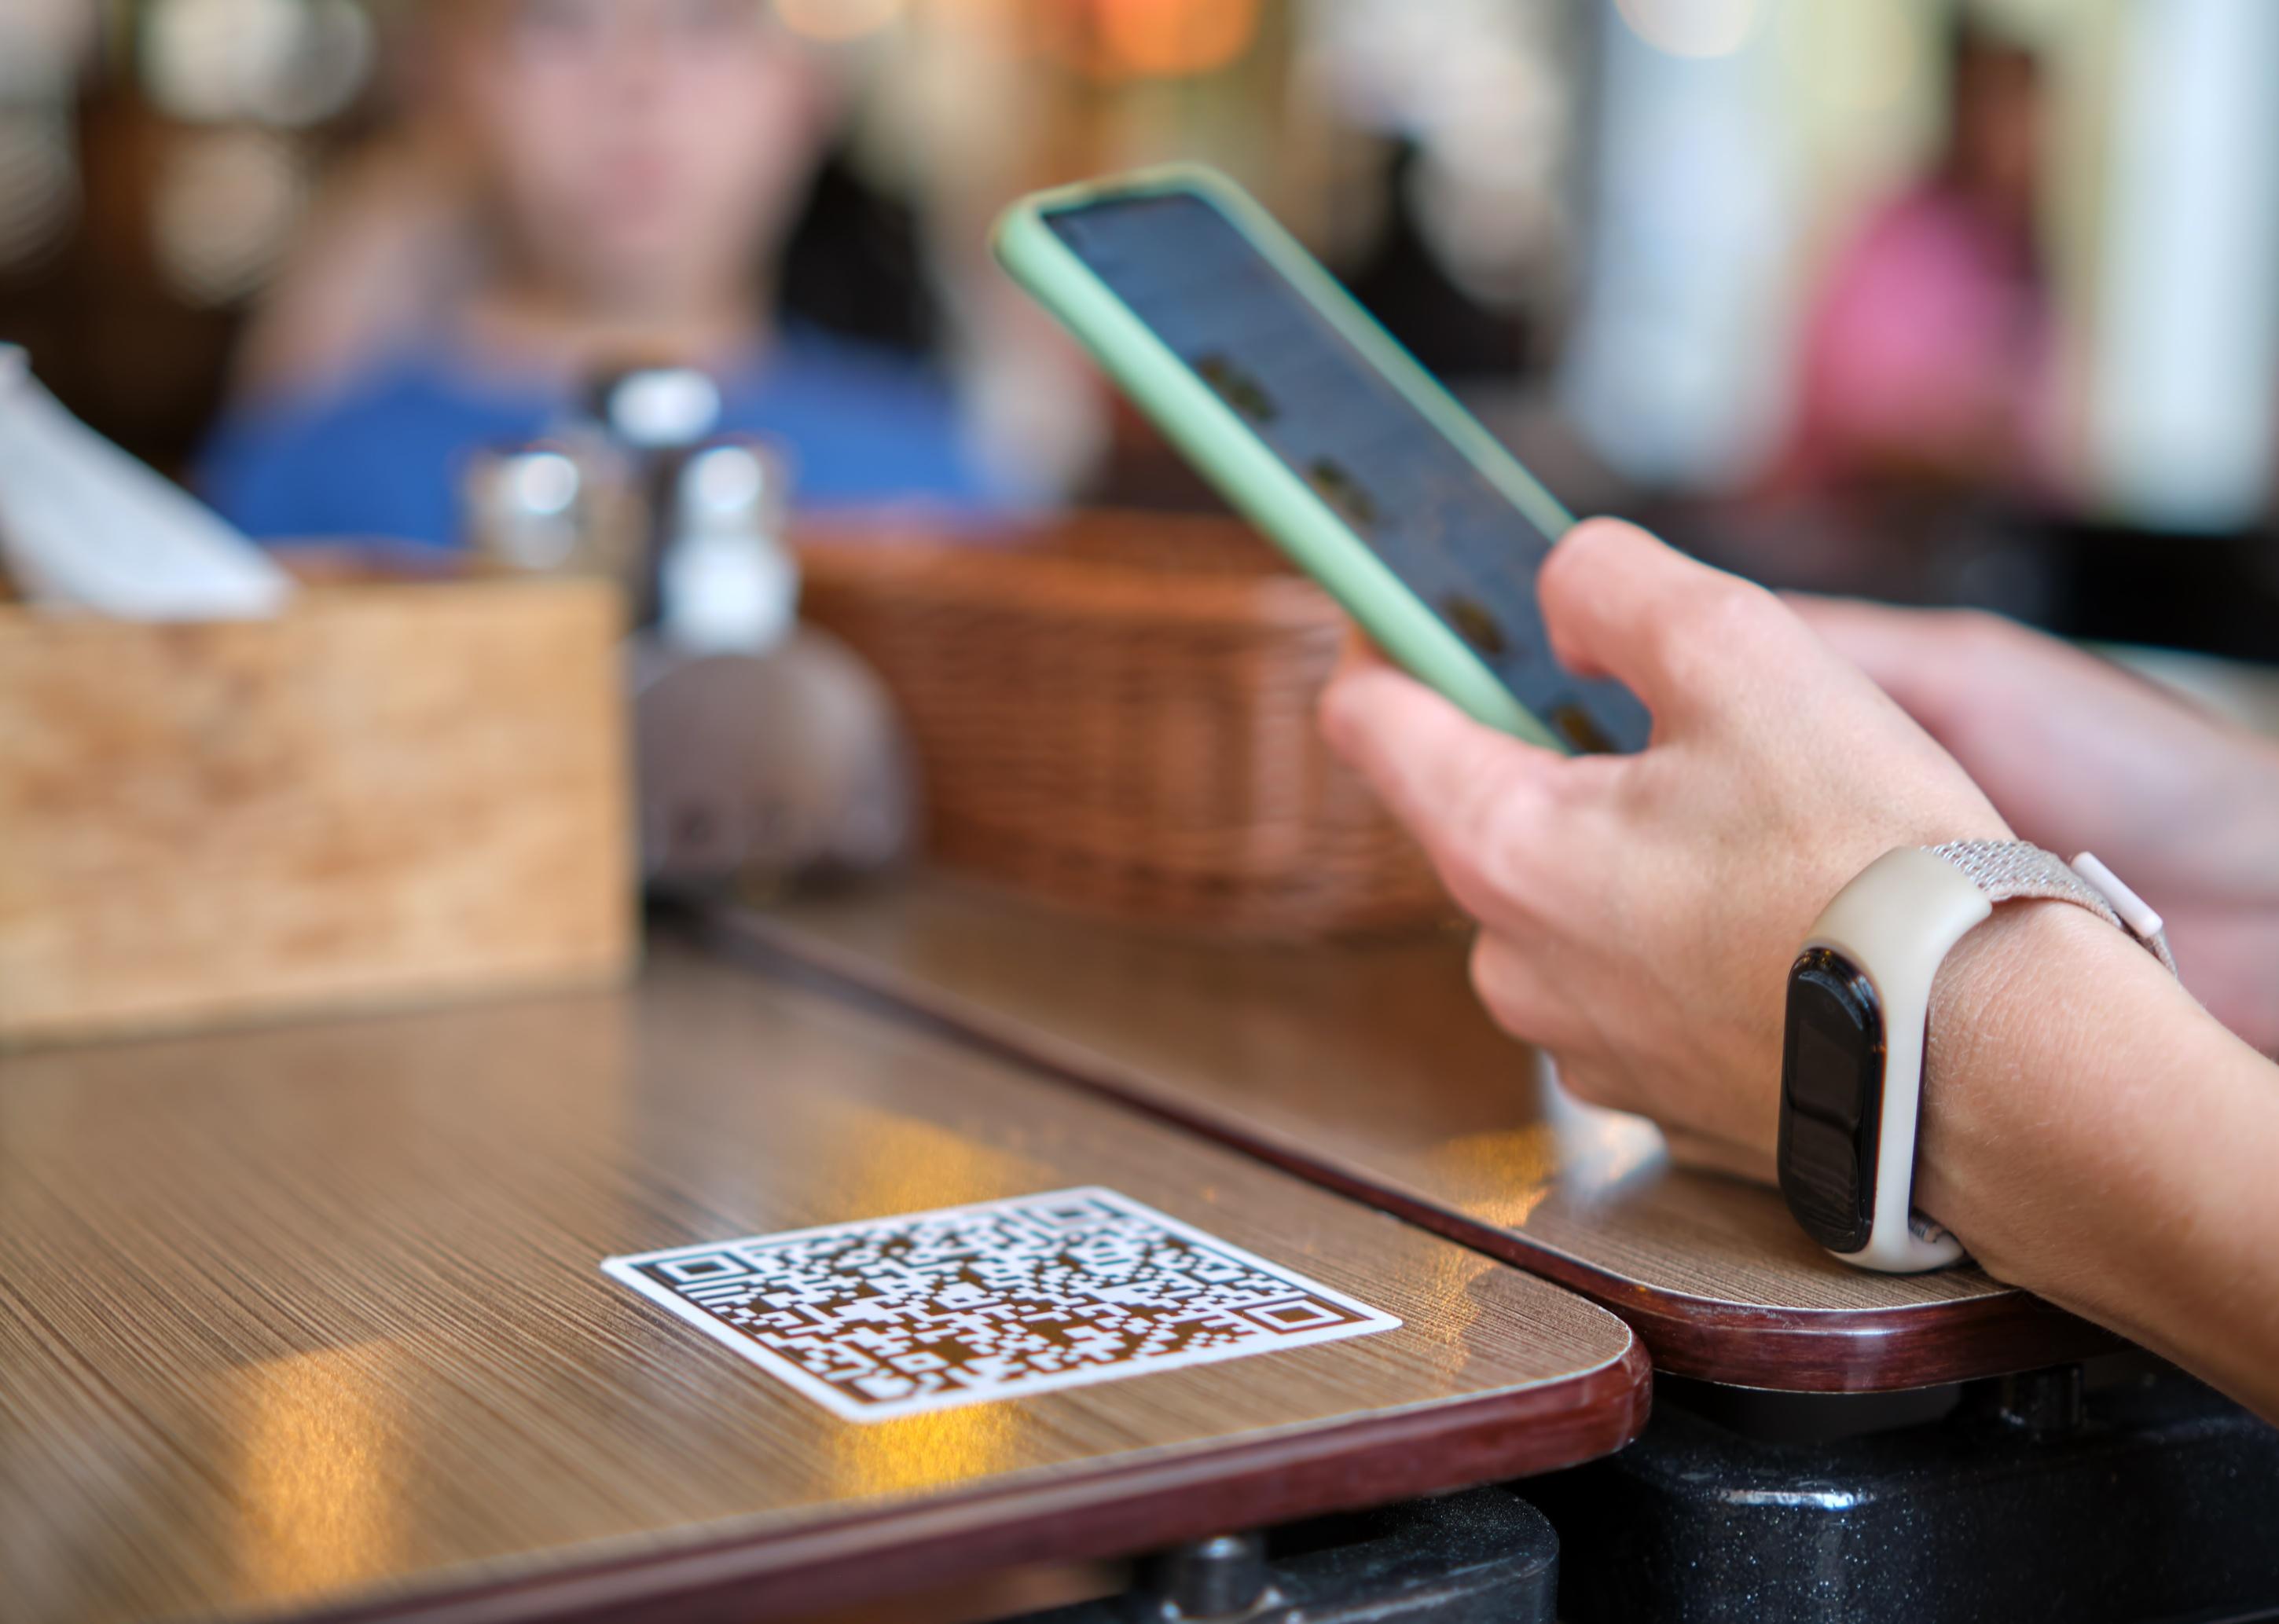 Closeup of guest scanning qr code with mobile phone